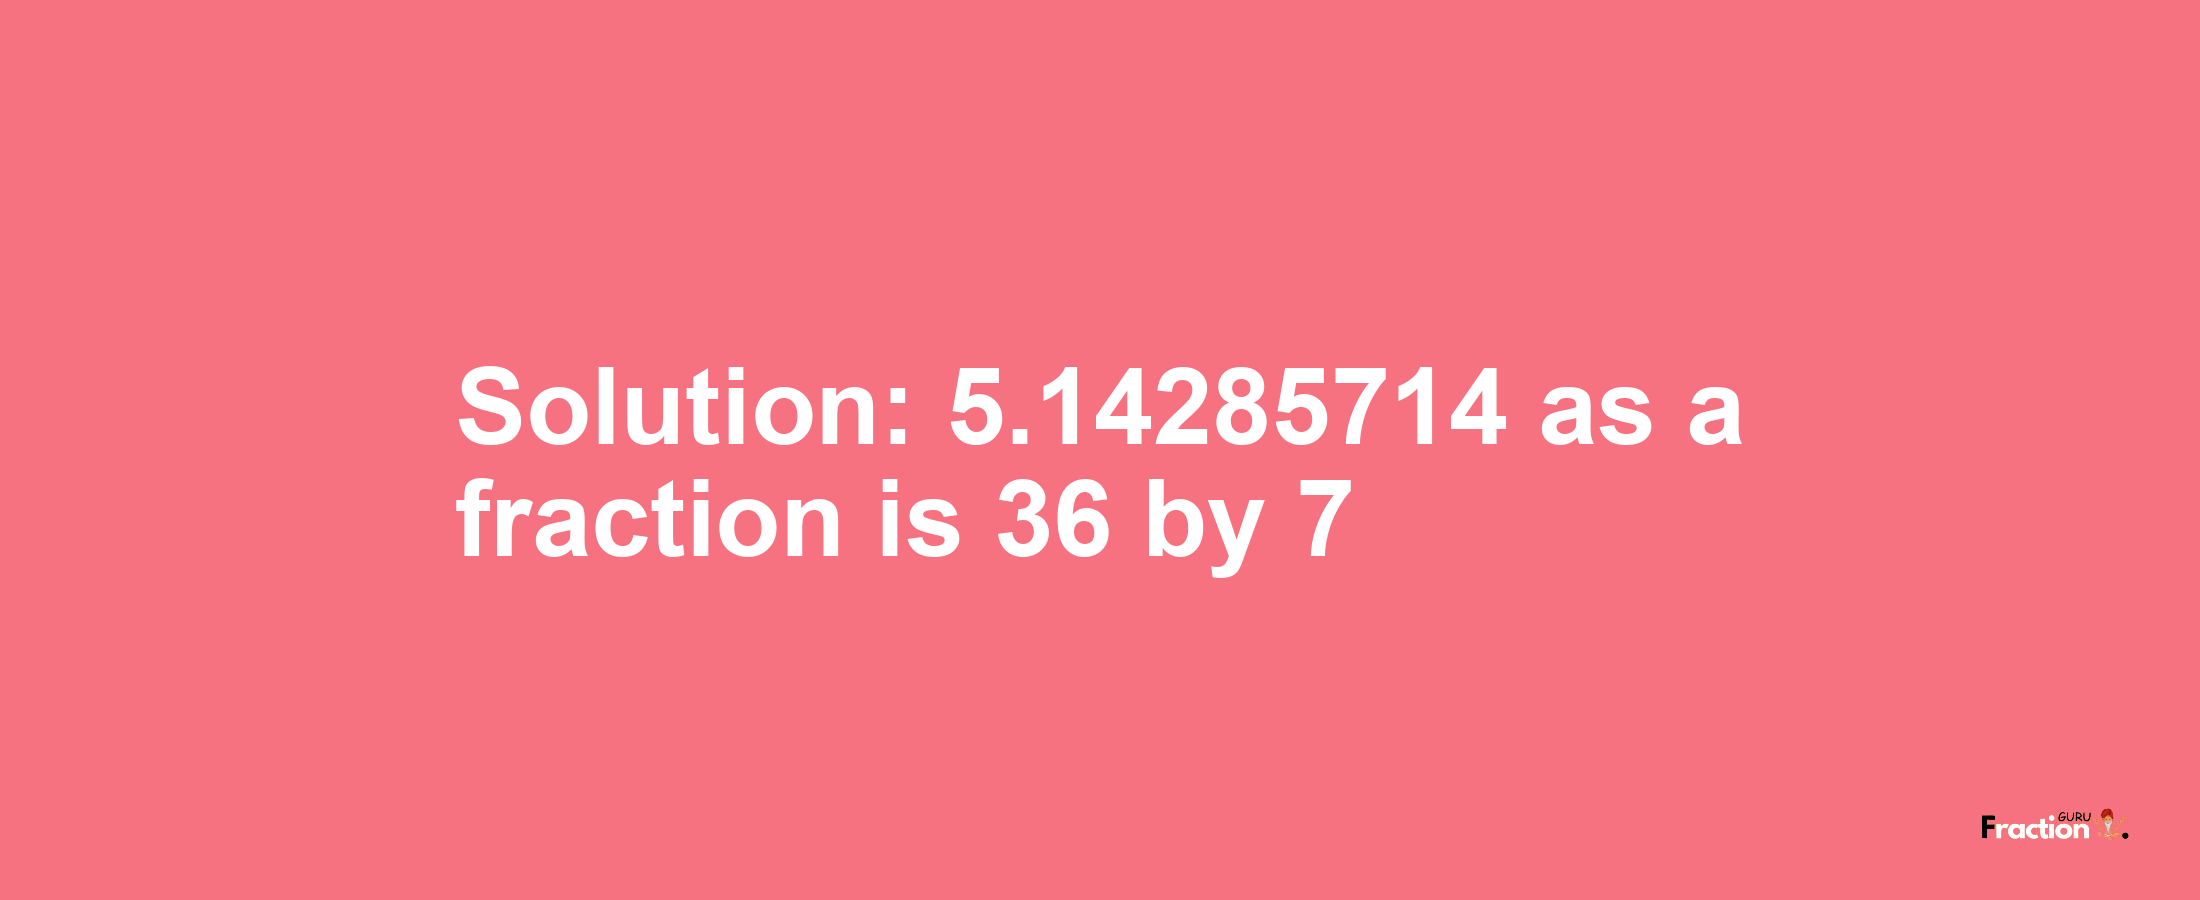 Solution:5.14285714 as a fraction is 36/7